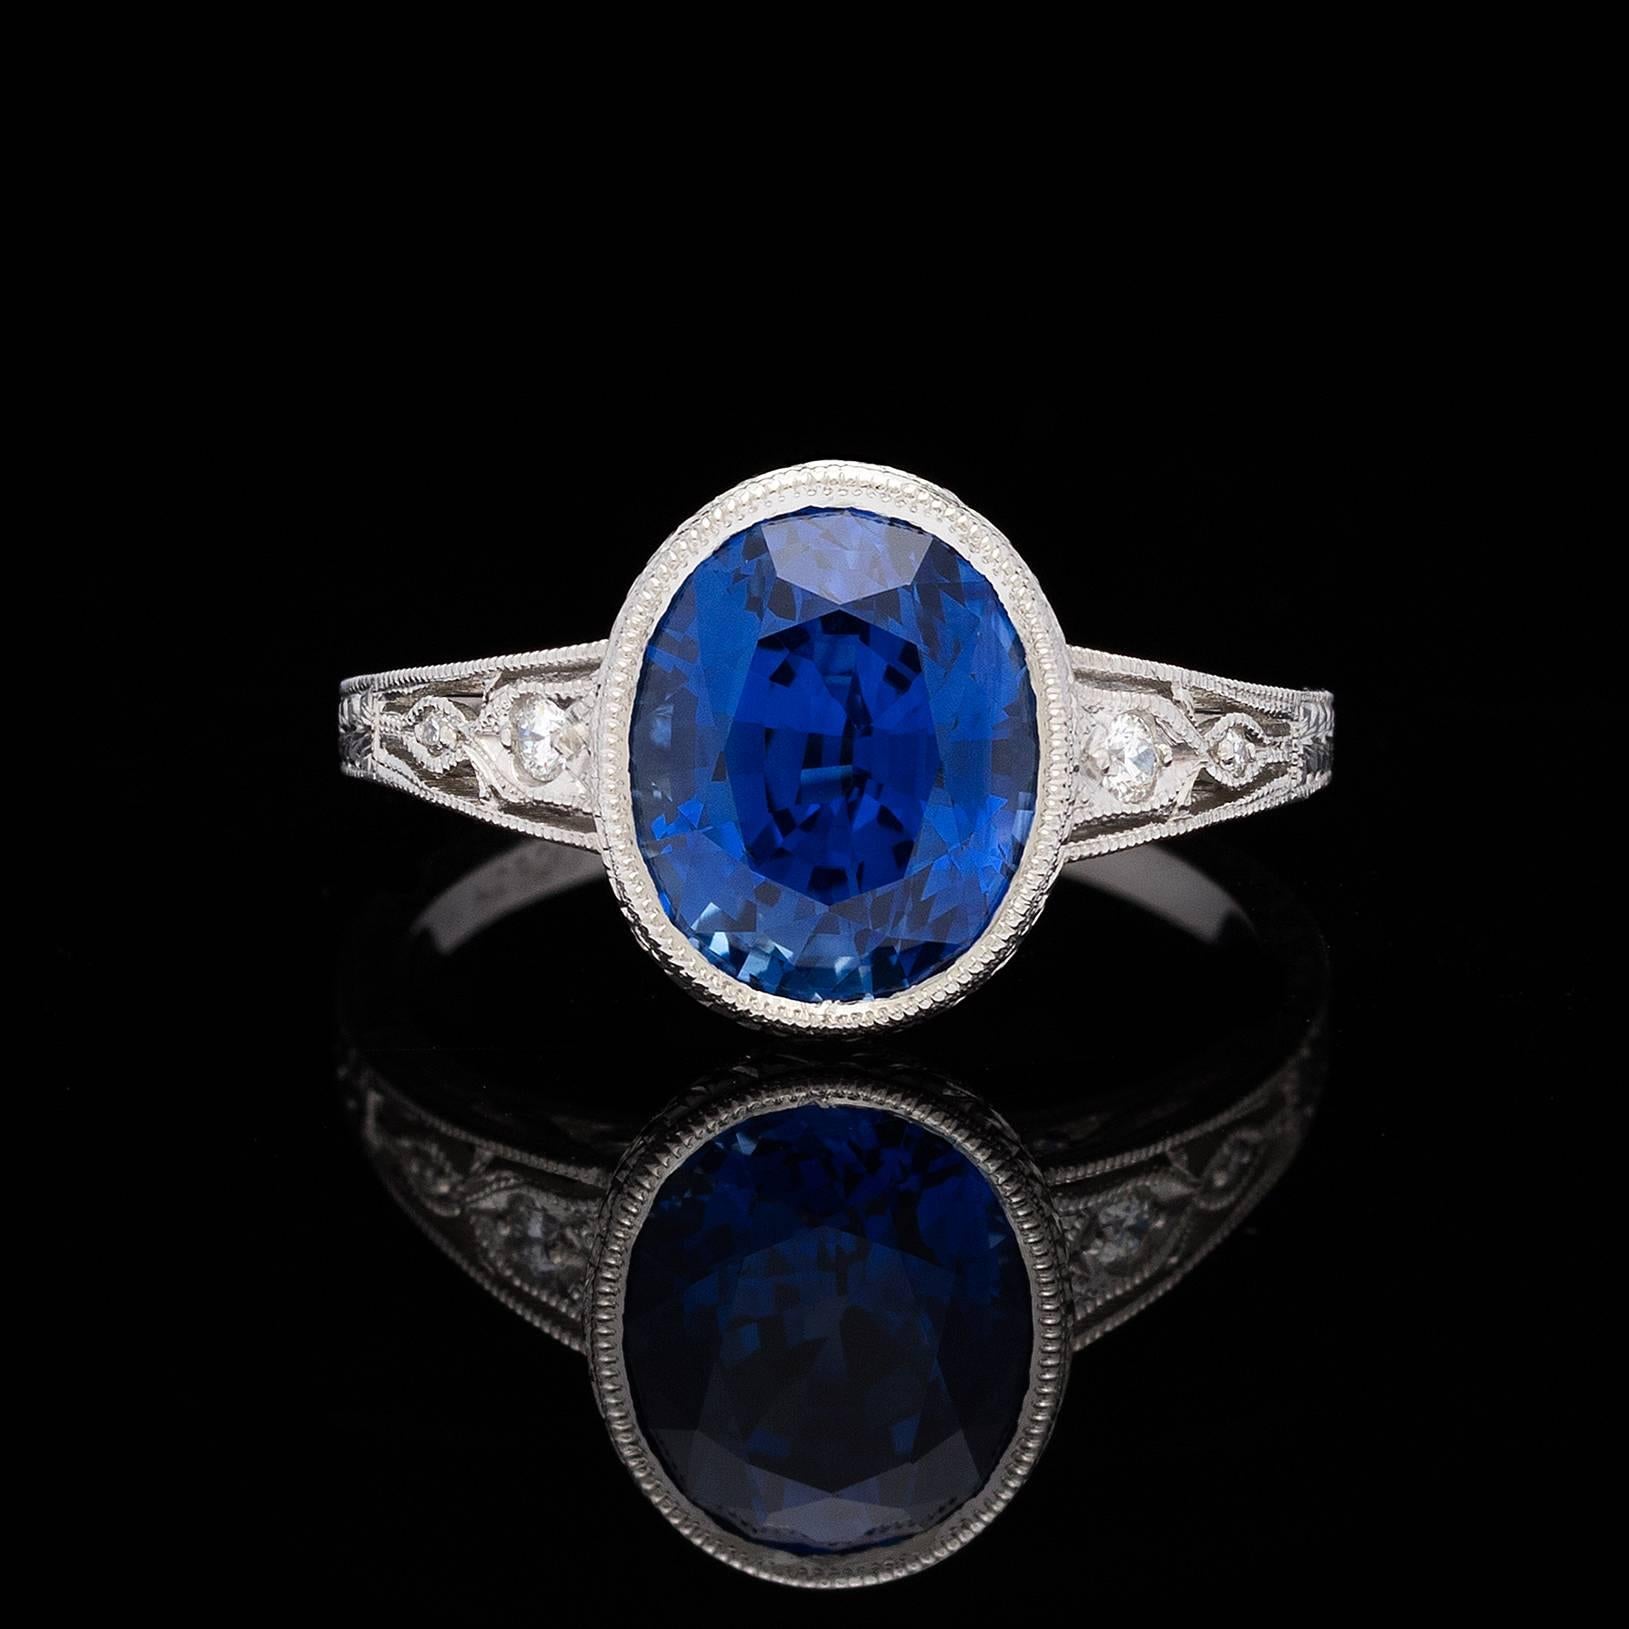 Stunning AGL 4.29 carats Sri Lanka Ceylon blue oval mixed-cut sapphire is bezel-set in a vintage style platinum setting with milligrain and filigree details, and accented by four round brilliant-cut diamonds totaling 0.05 carat.  The ring is